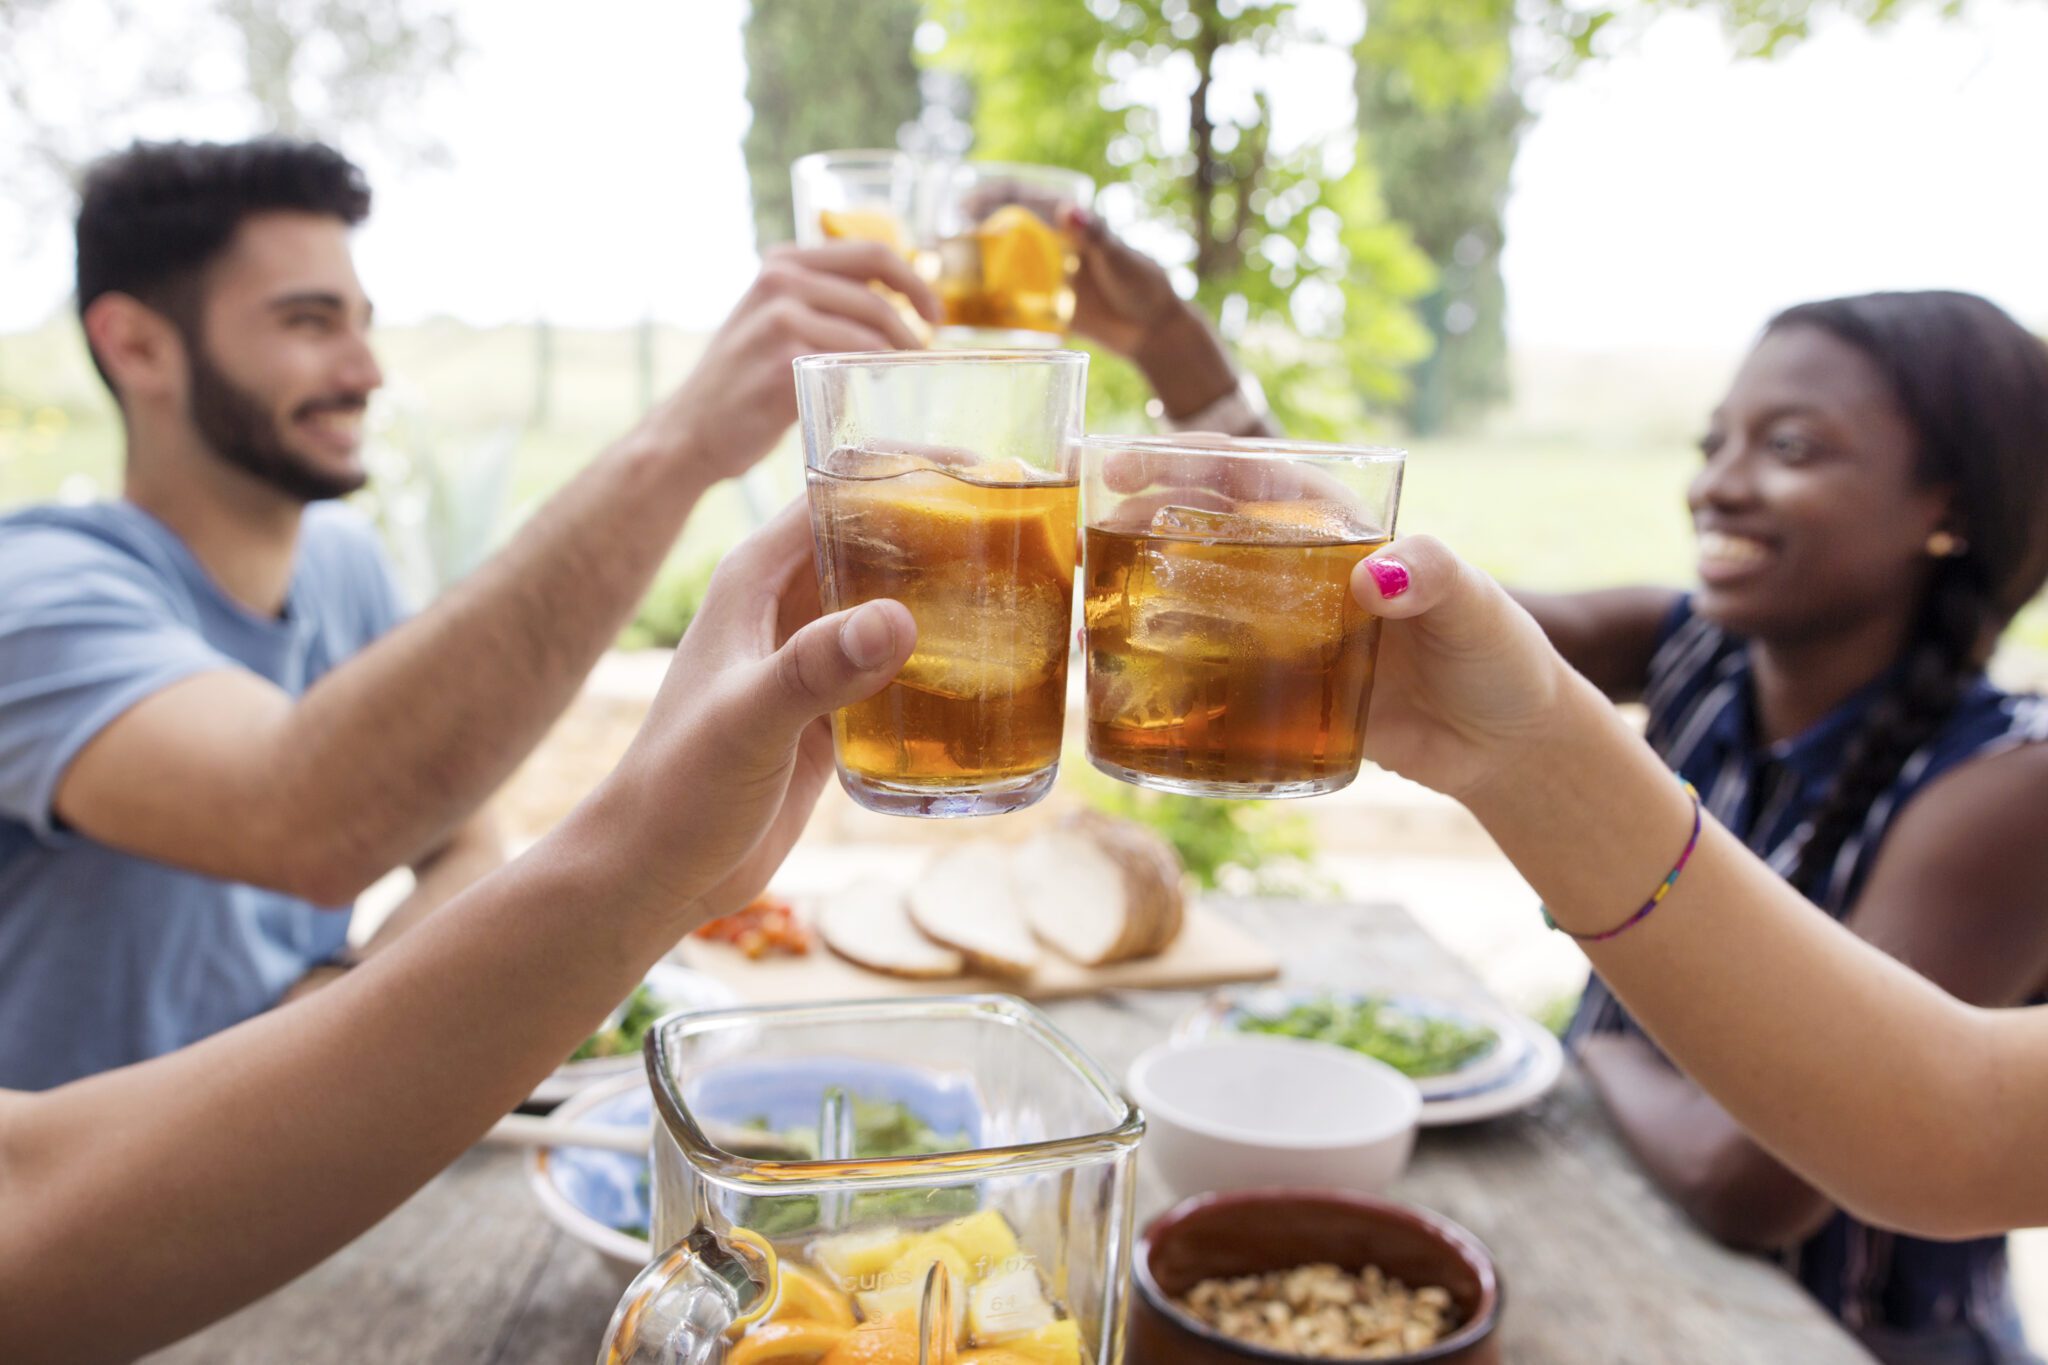 Friends Toasting Iced Tea Glasses At Outdoor Table